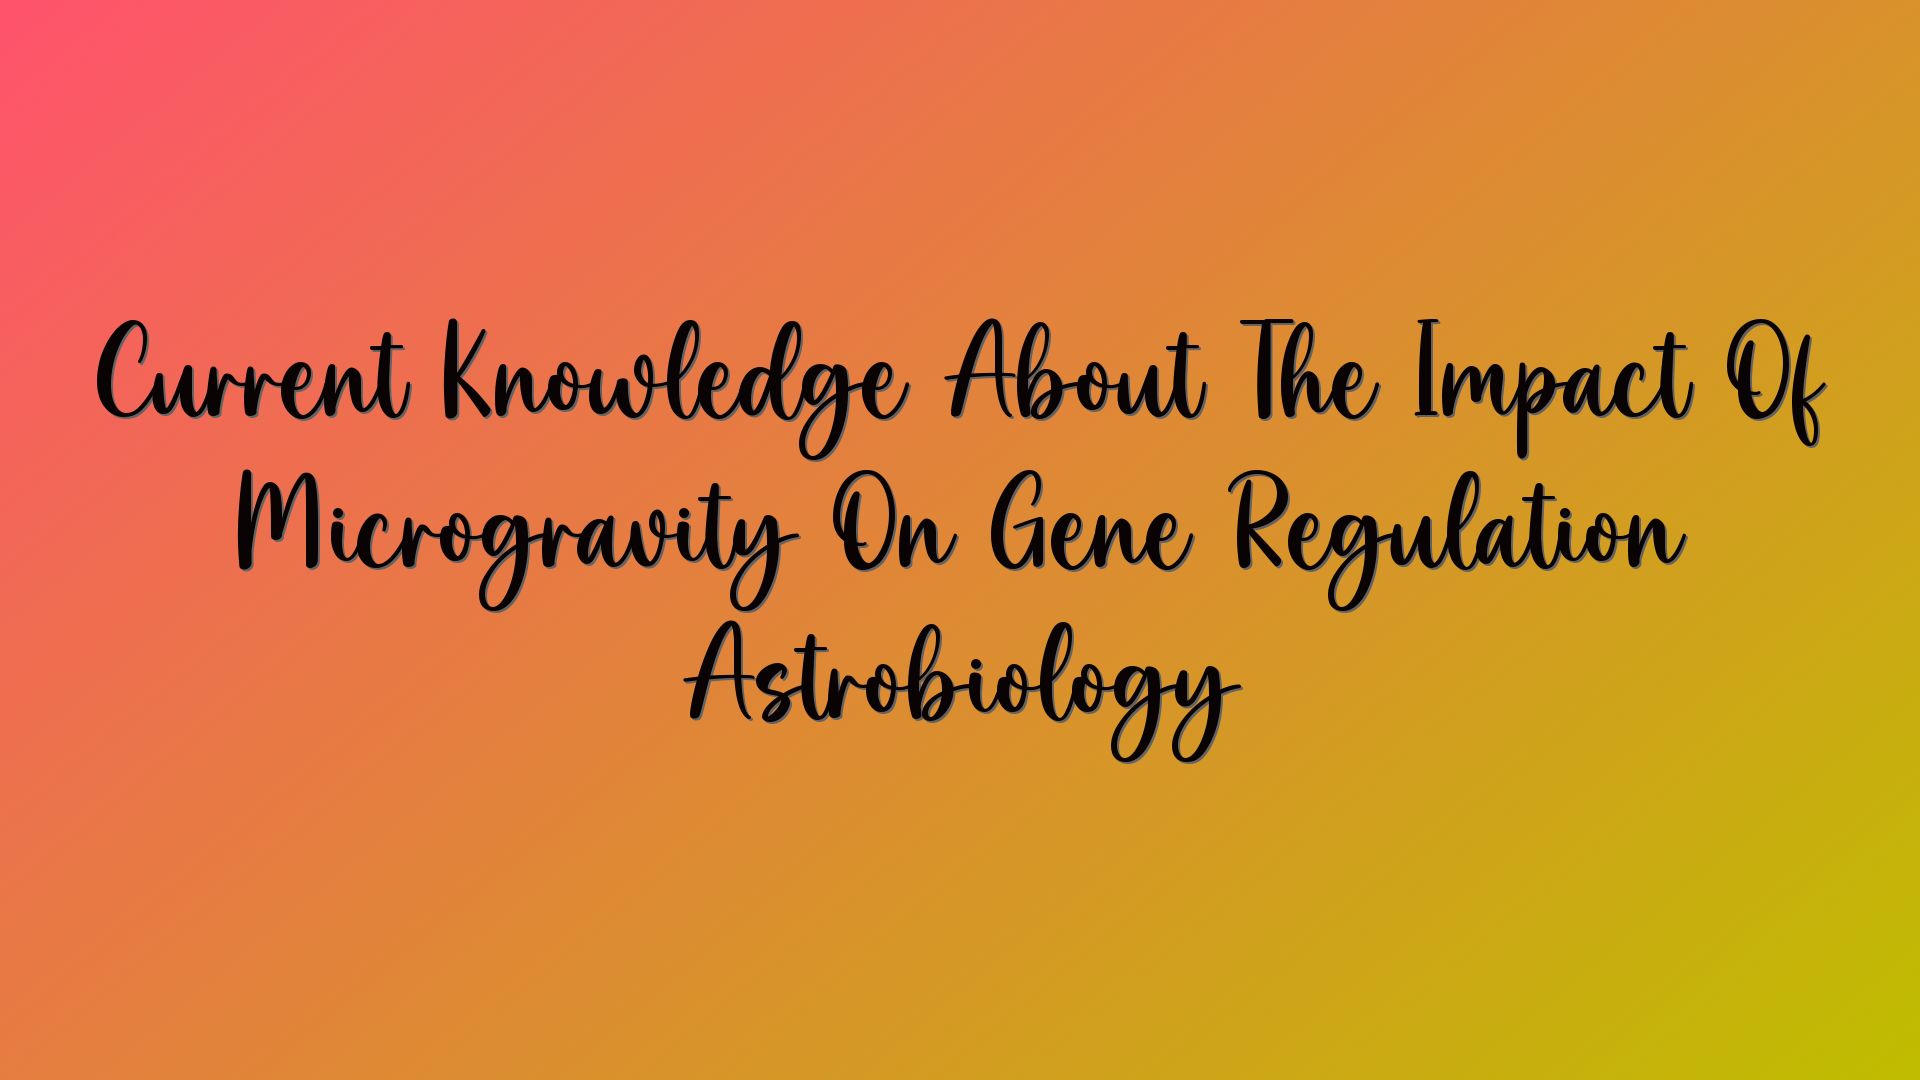 Current Knowledge About The Impact Of Microgravity On Gene Regulation Astrobiology